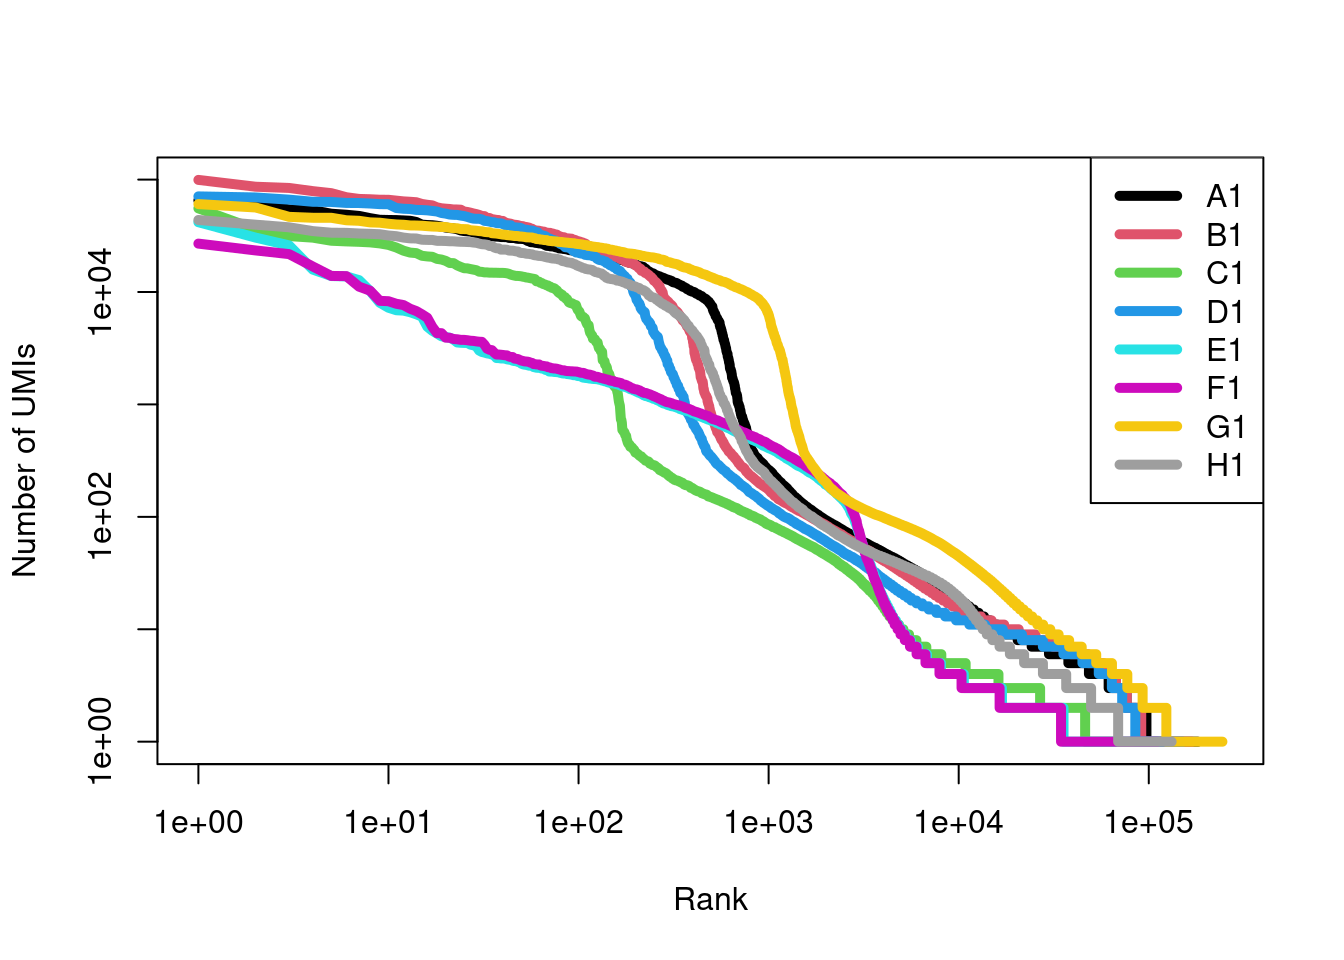 Barcode rank curves for all samples in the HiSeq 4000-sequenced mammary gland dataset, before removing any swapped molecules.